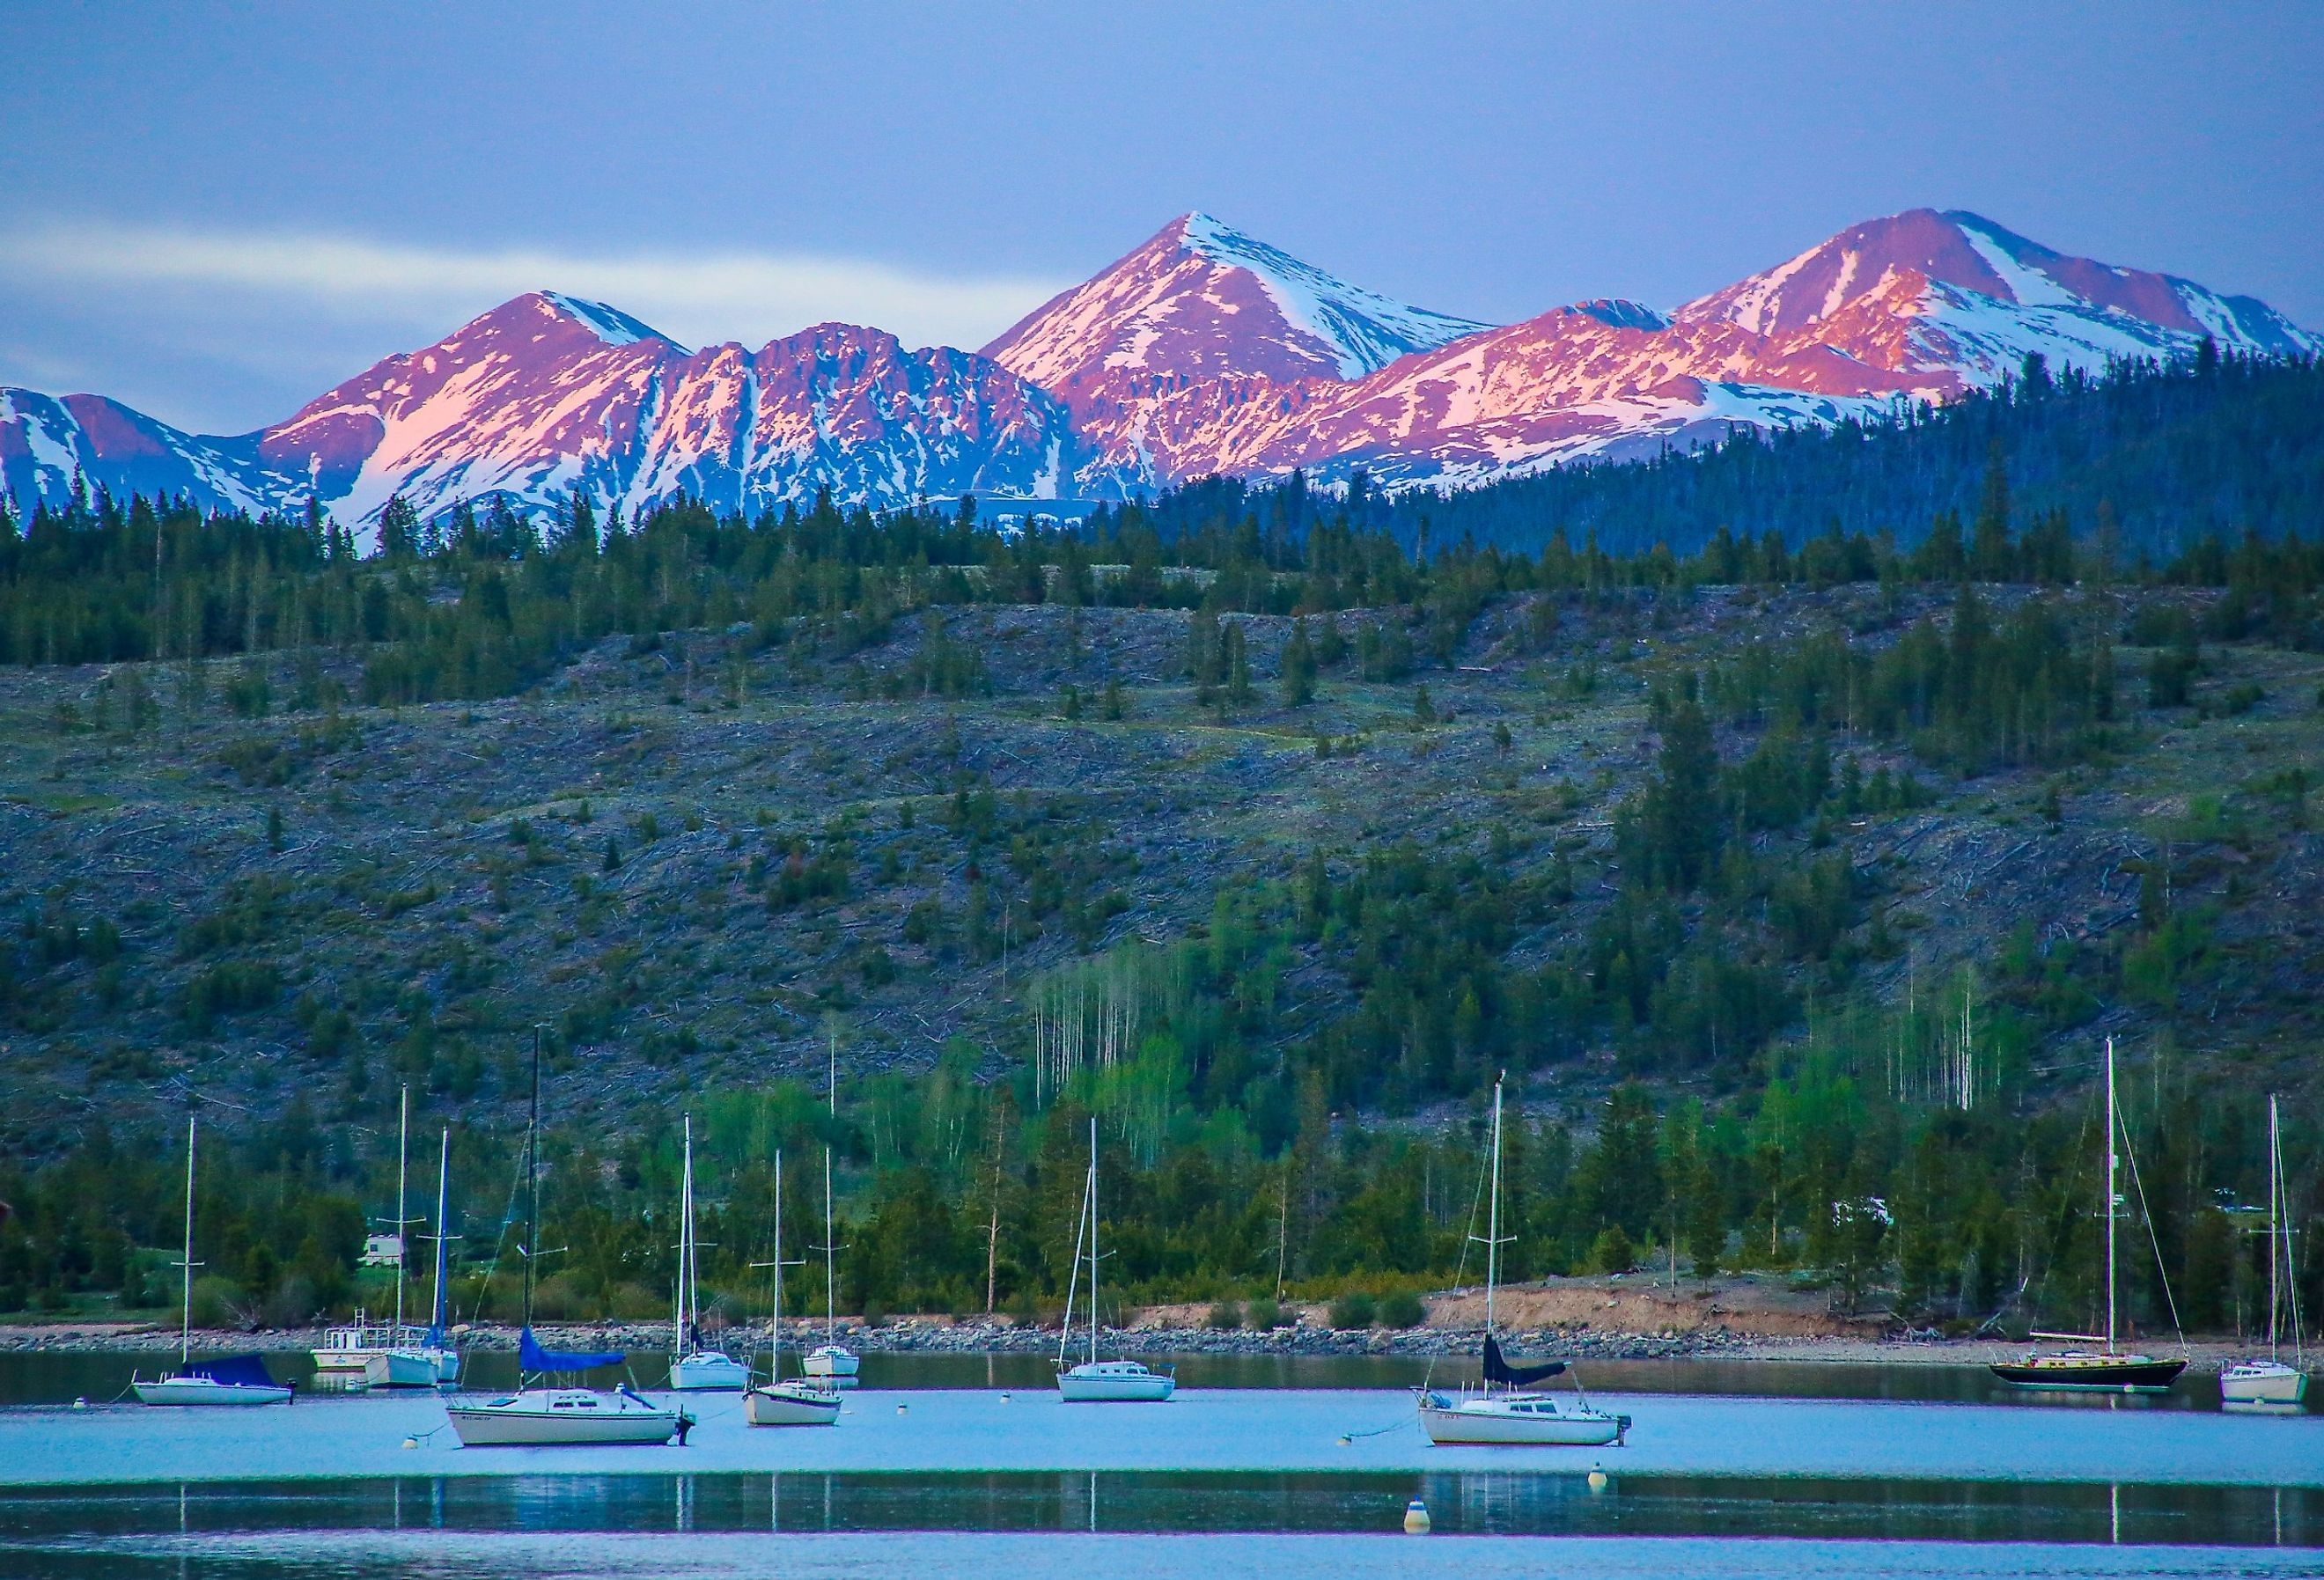 Alpenglow hitting the peaks of Grays and Torreys beyond the Frisco Bay Marina in Frisco, Colorado. Image credit Joey Reuteman via Shutterstock.